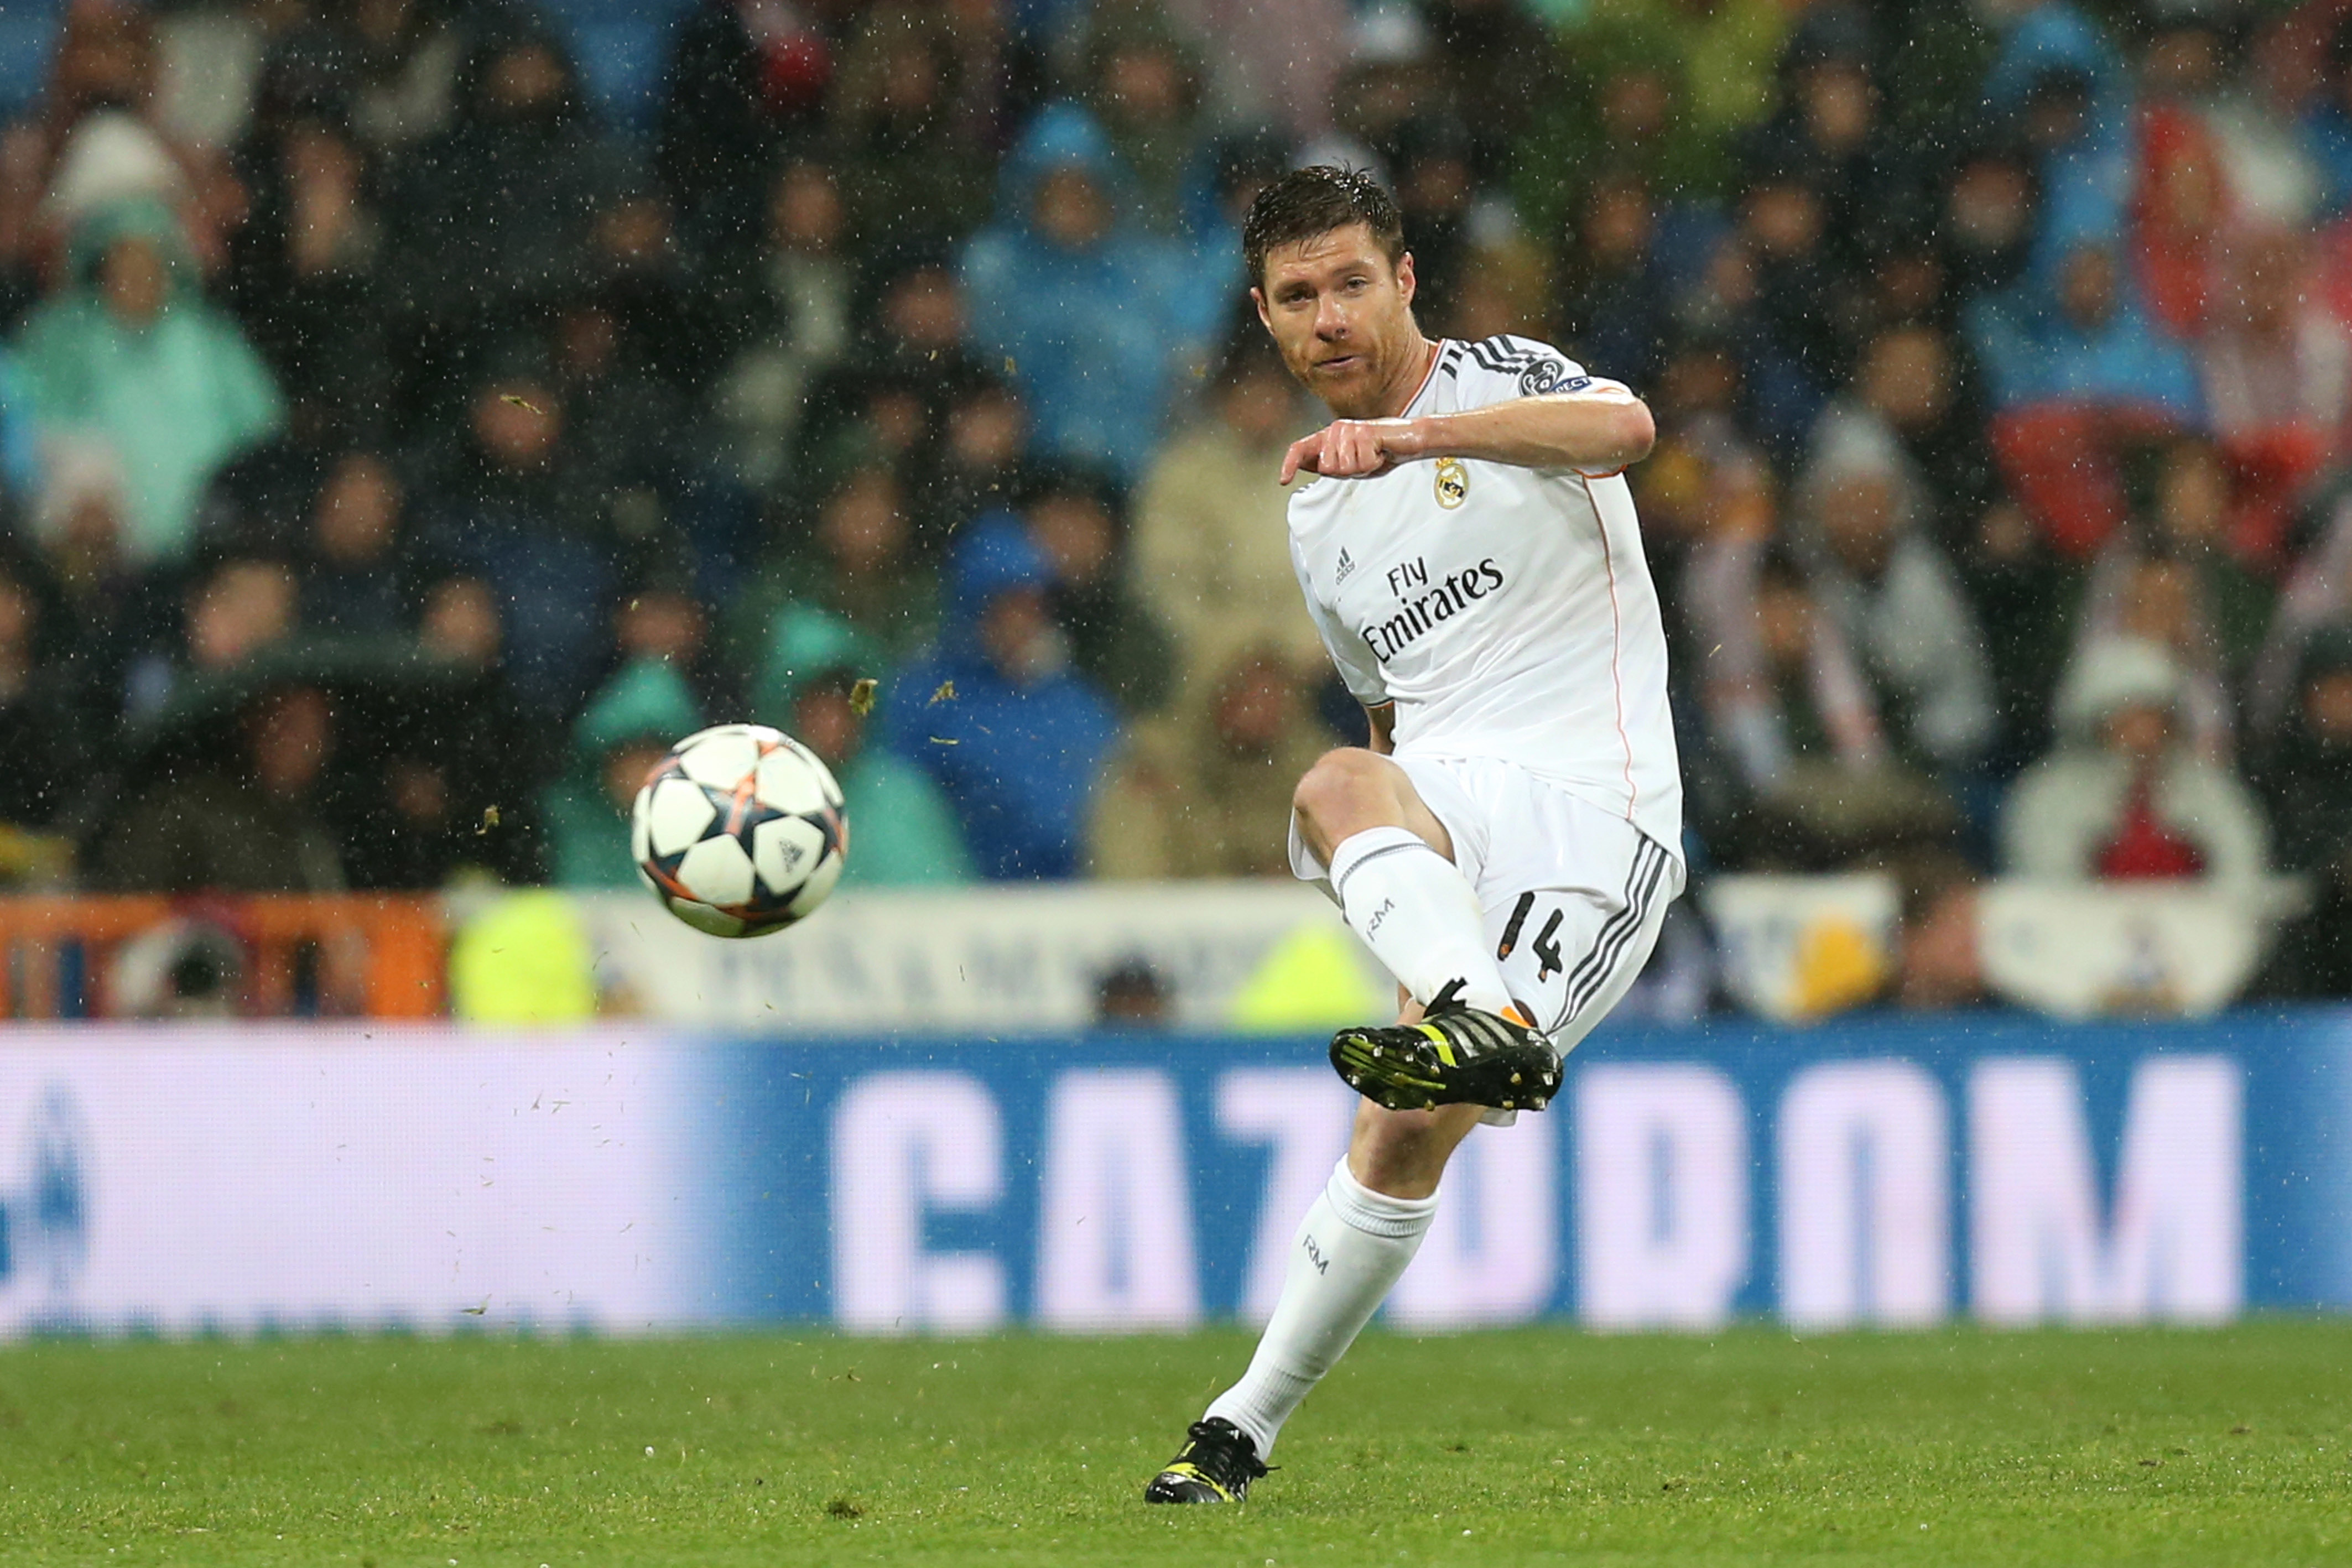 Xabi Alonso plays a pass during Real Madrid's Champions League quarter-final against Borussia Dortmund in 2014.